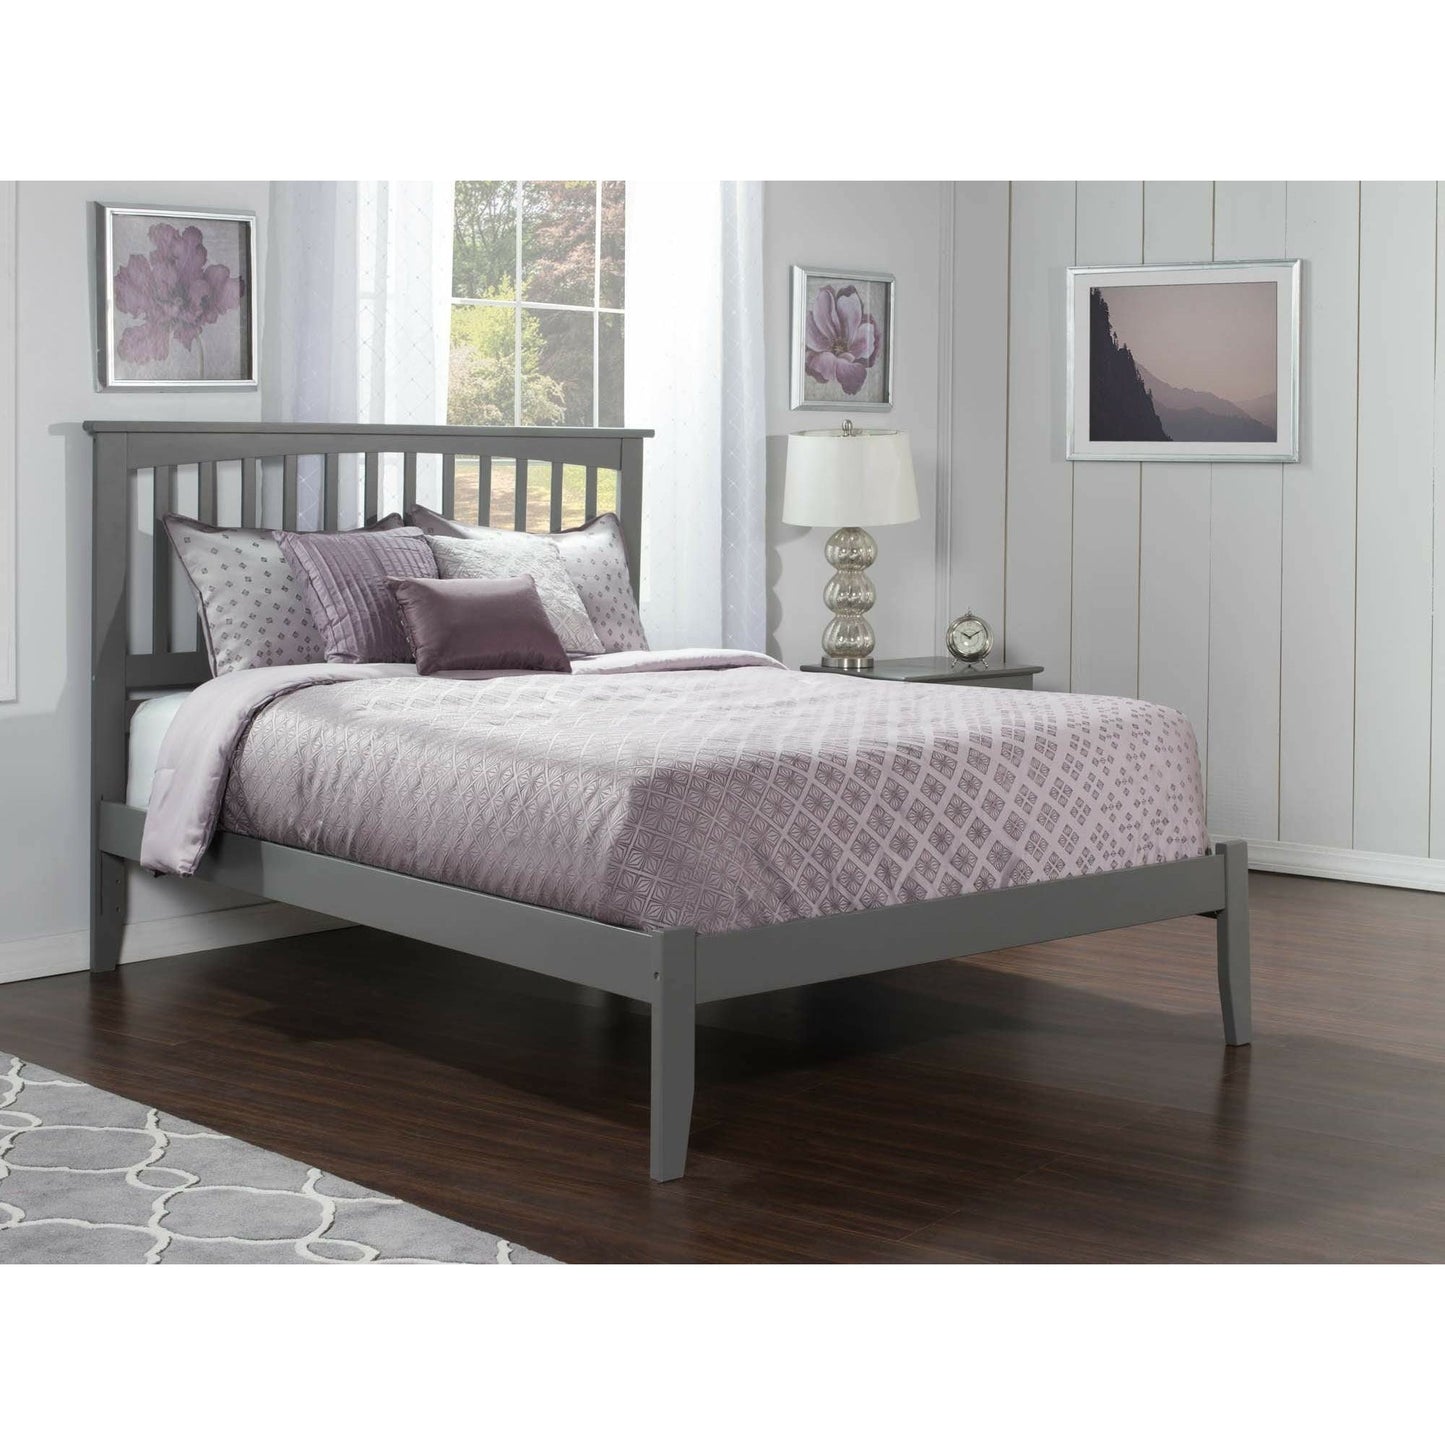 Atlantic Furniture Bed Mission King Platform Bed with Open Foot Board in Espresso